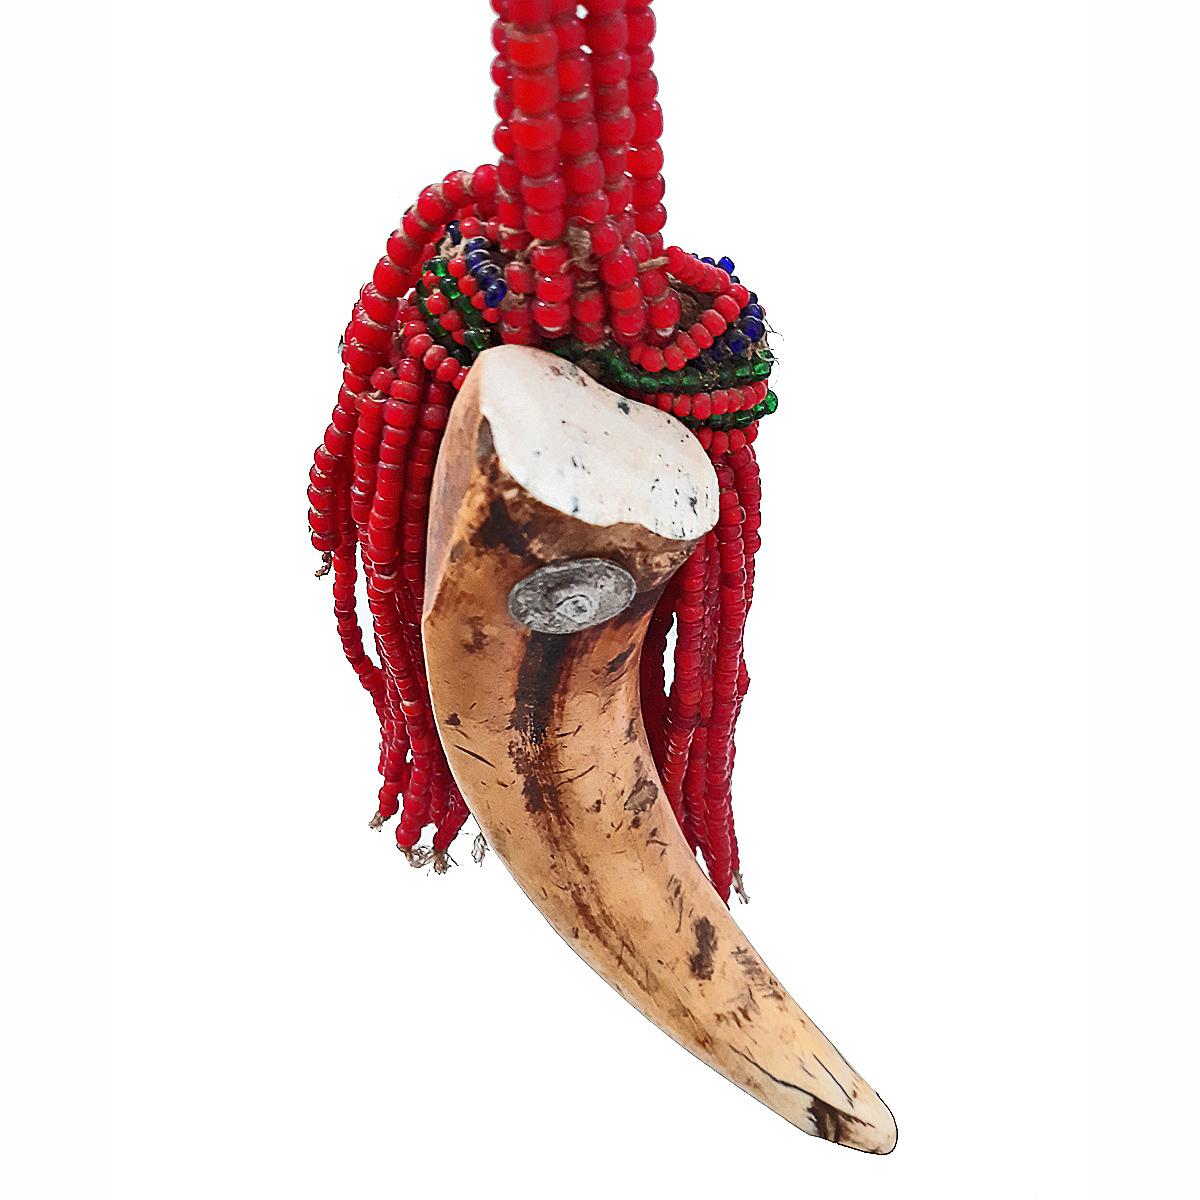 Beads Late 20th Century Bead and Tusk Headdress from Ethiopia